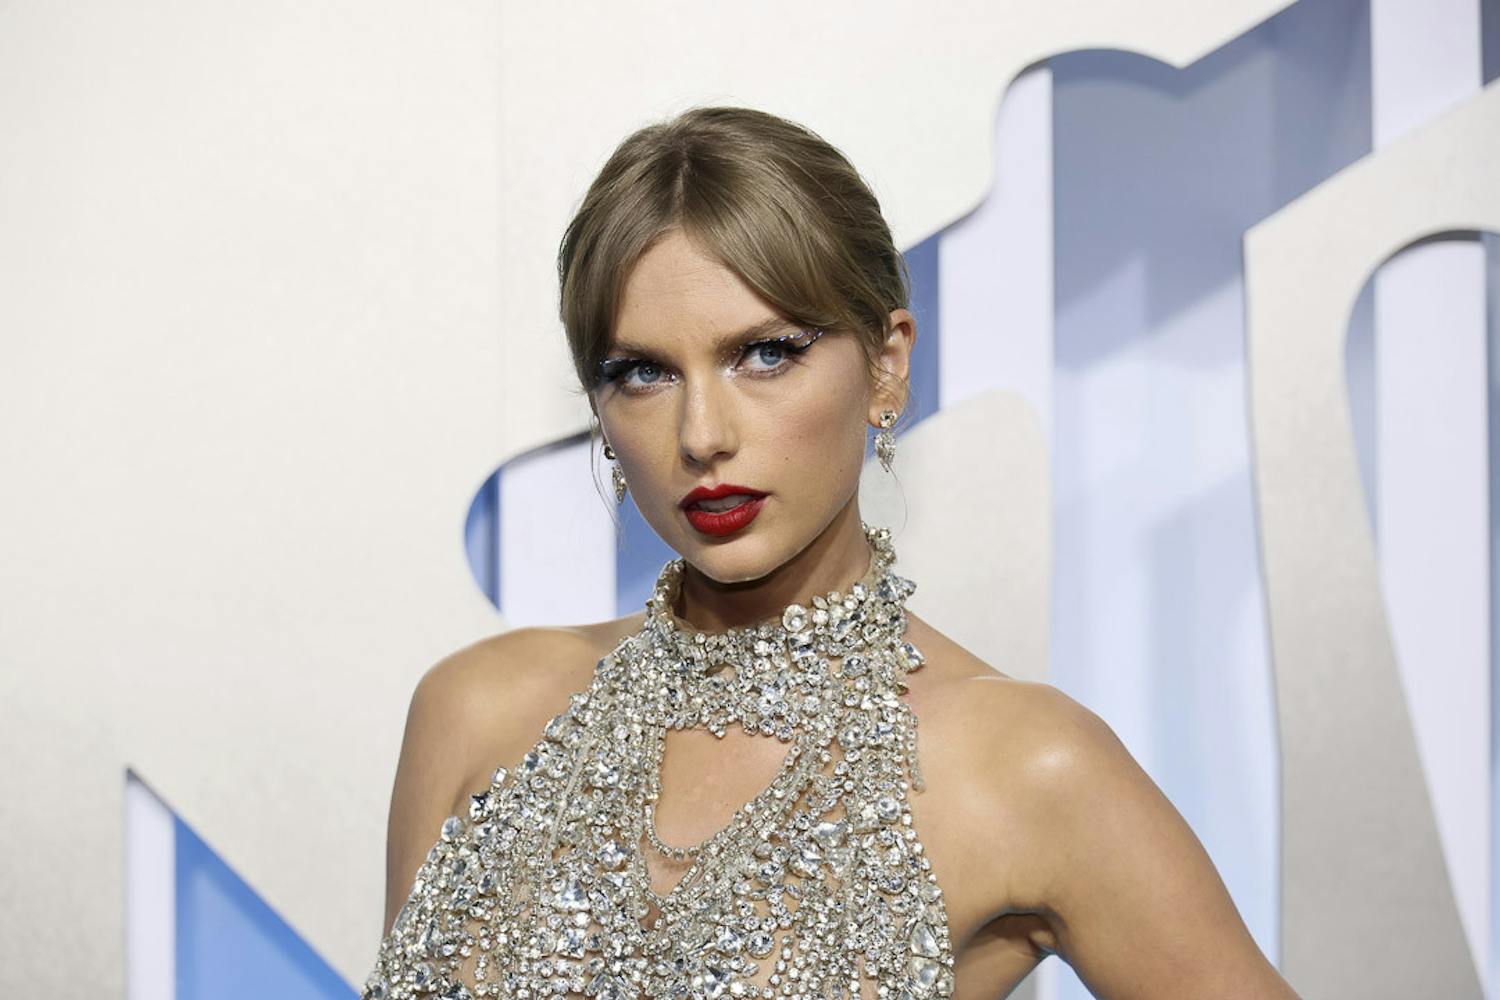 Taylor Swift attends the 2022 MTV VMAs at Prudential Center in Newark, New Jersey, on Aug. 28, 2022. Taylor Swift is beginning her Eras Tour, performing three-hour setlists that feature songs from her four newest albums: "Lover," "folklore," "evermore" and her most recent album, "Midnights."